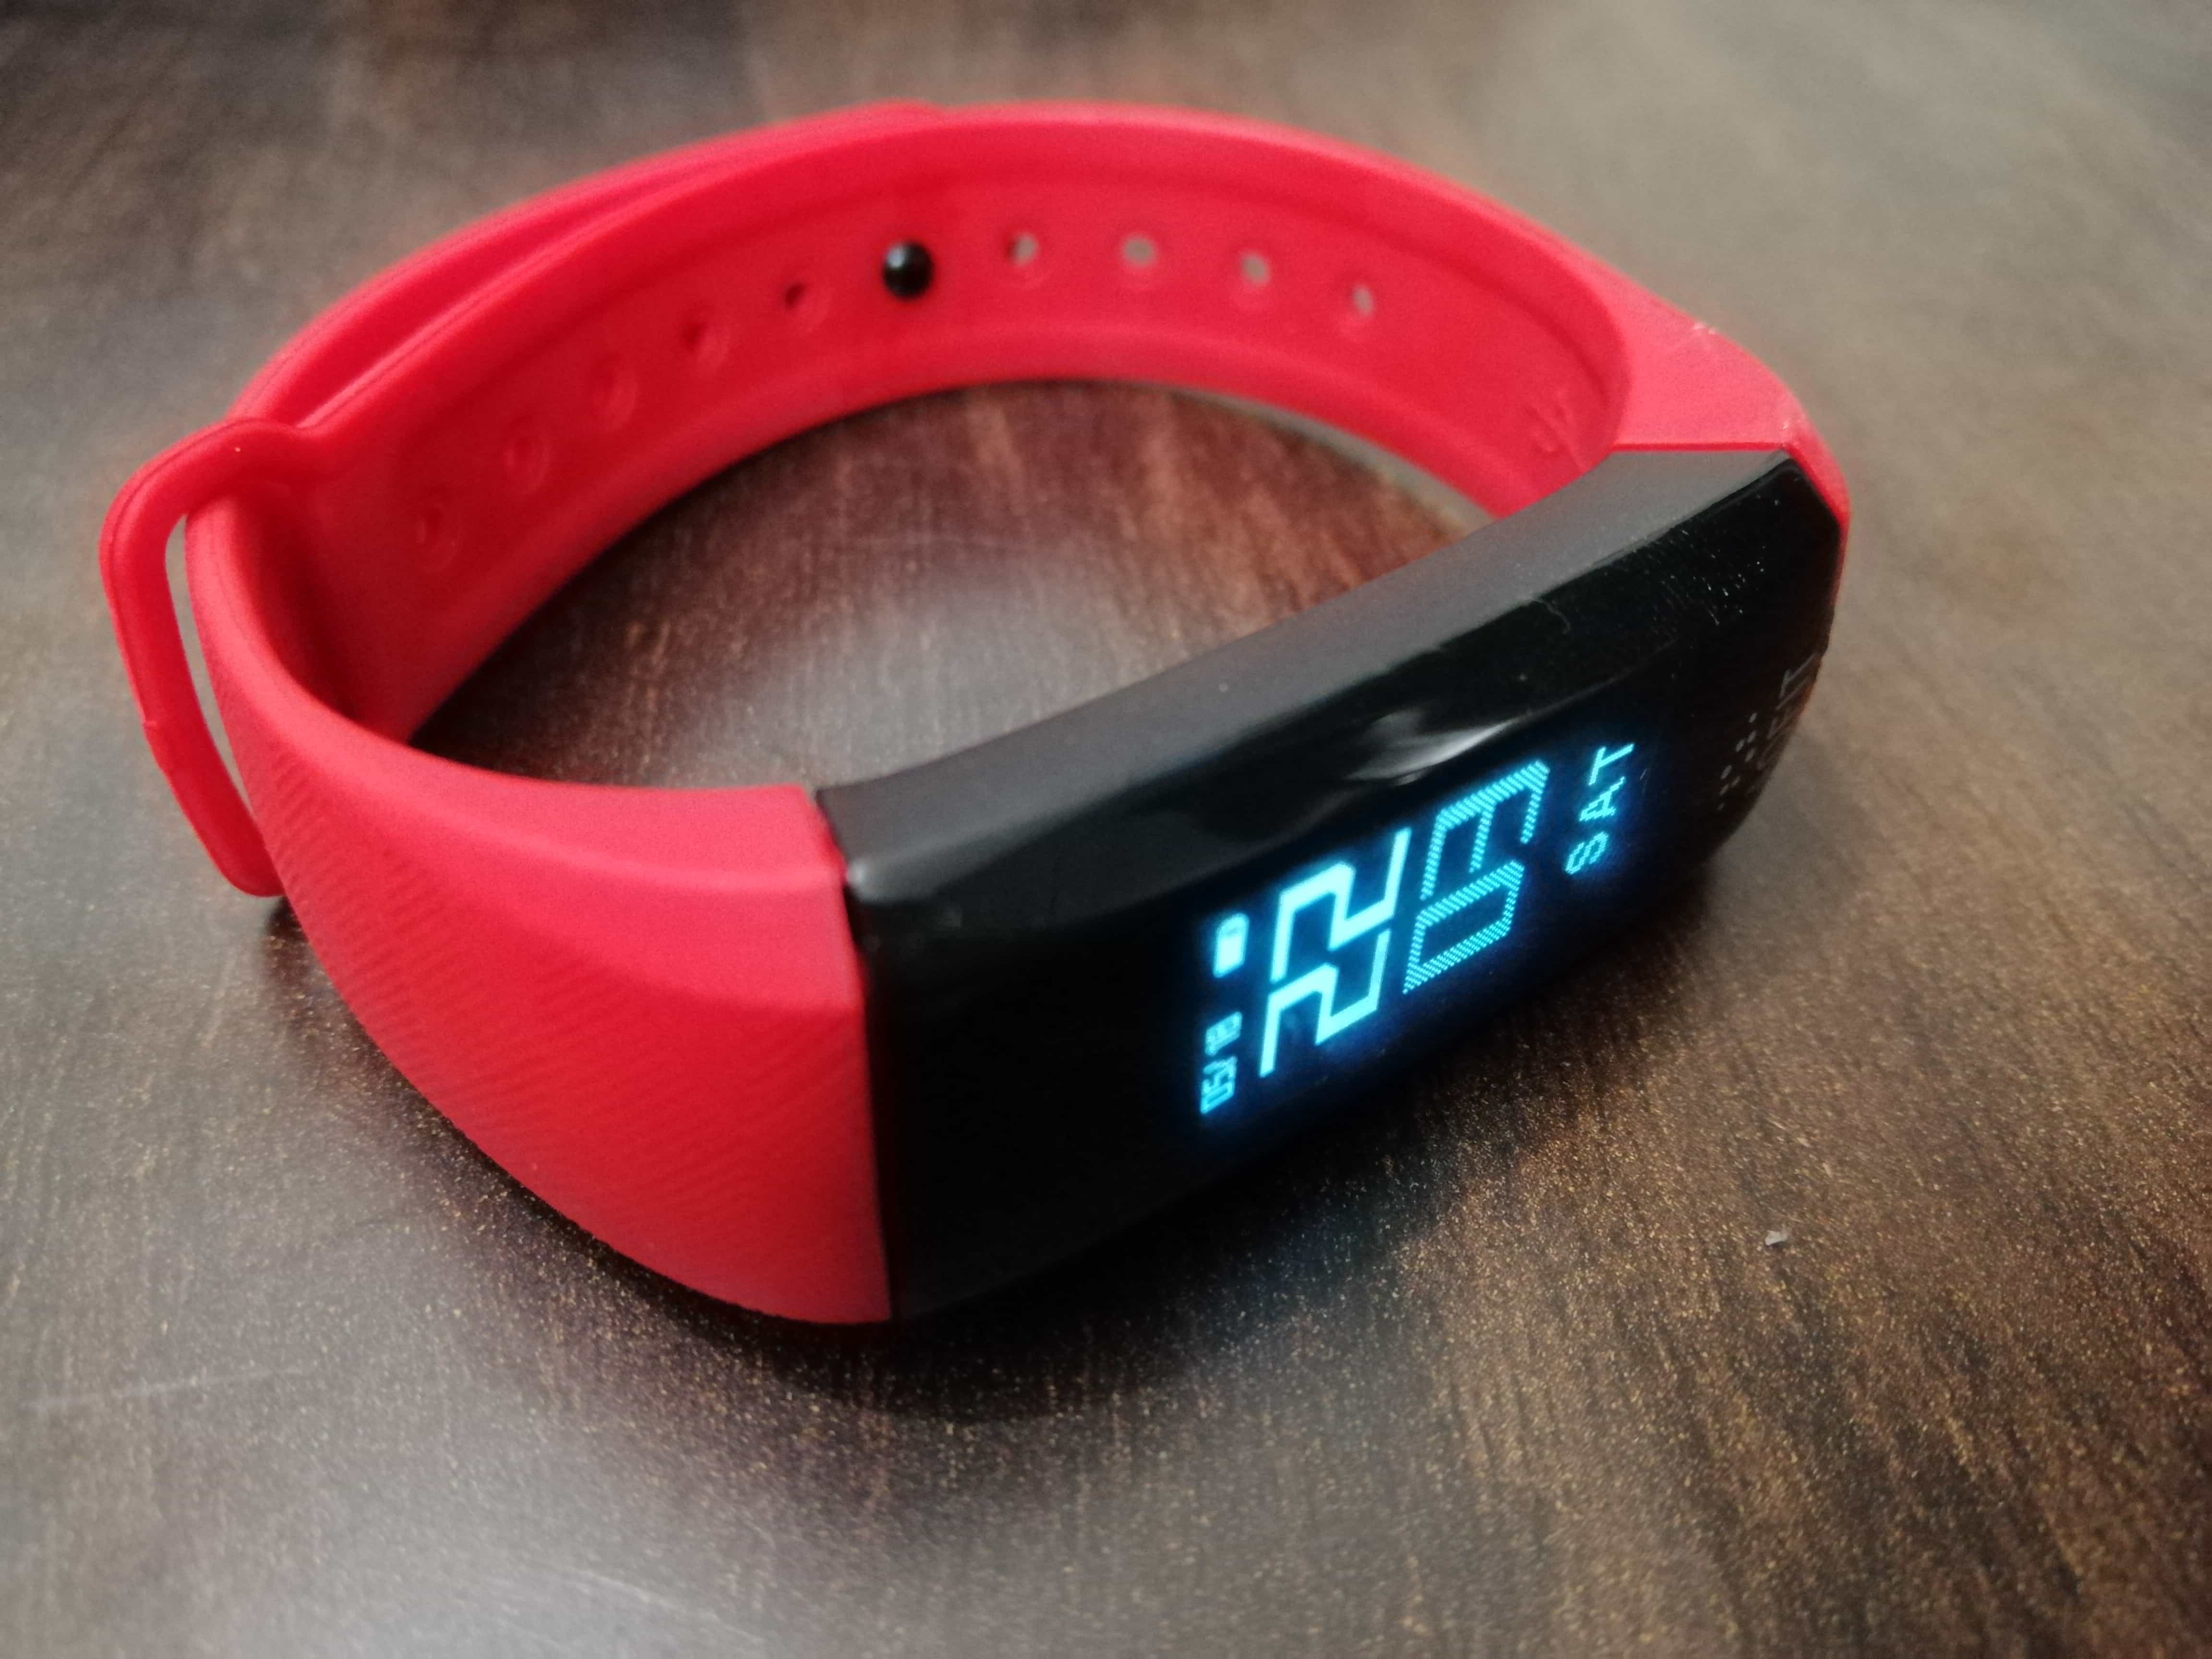 AQFIT M2 Smart Fitness Band Full Review